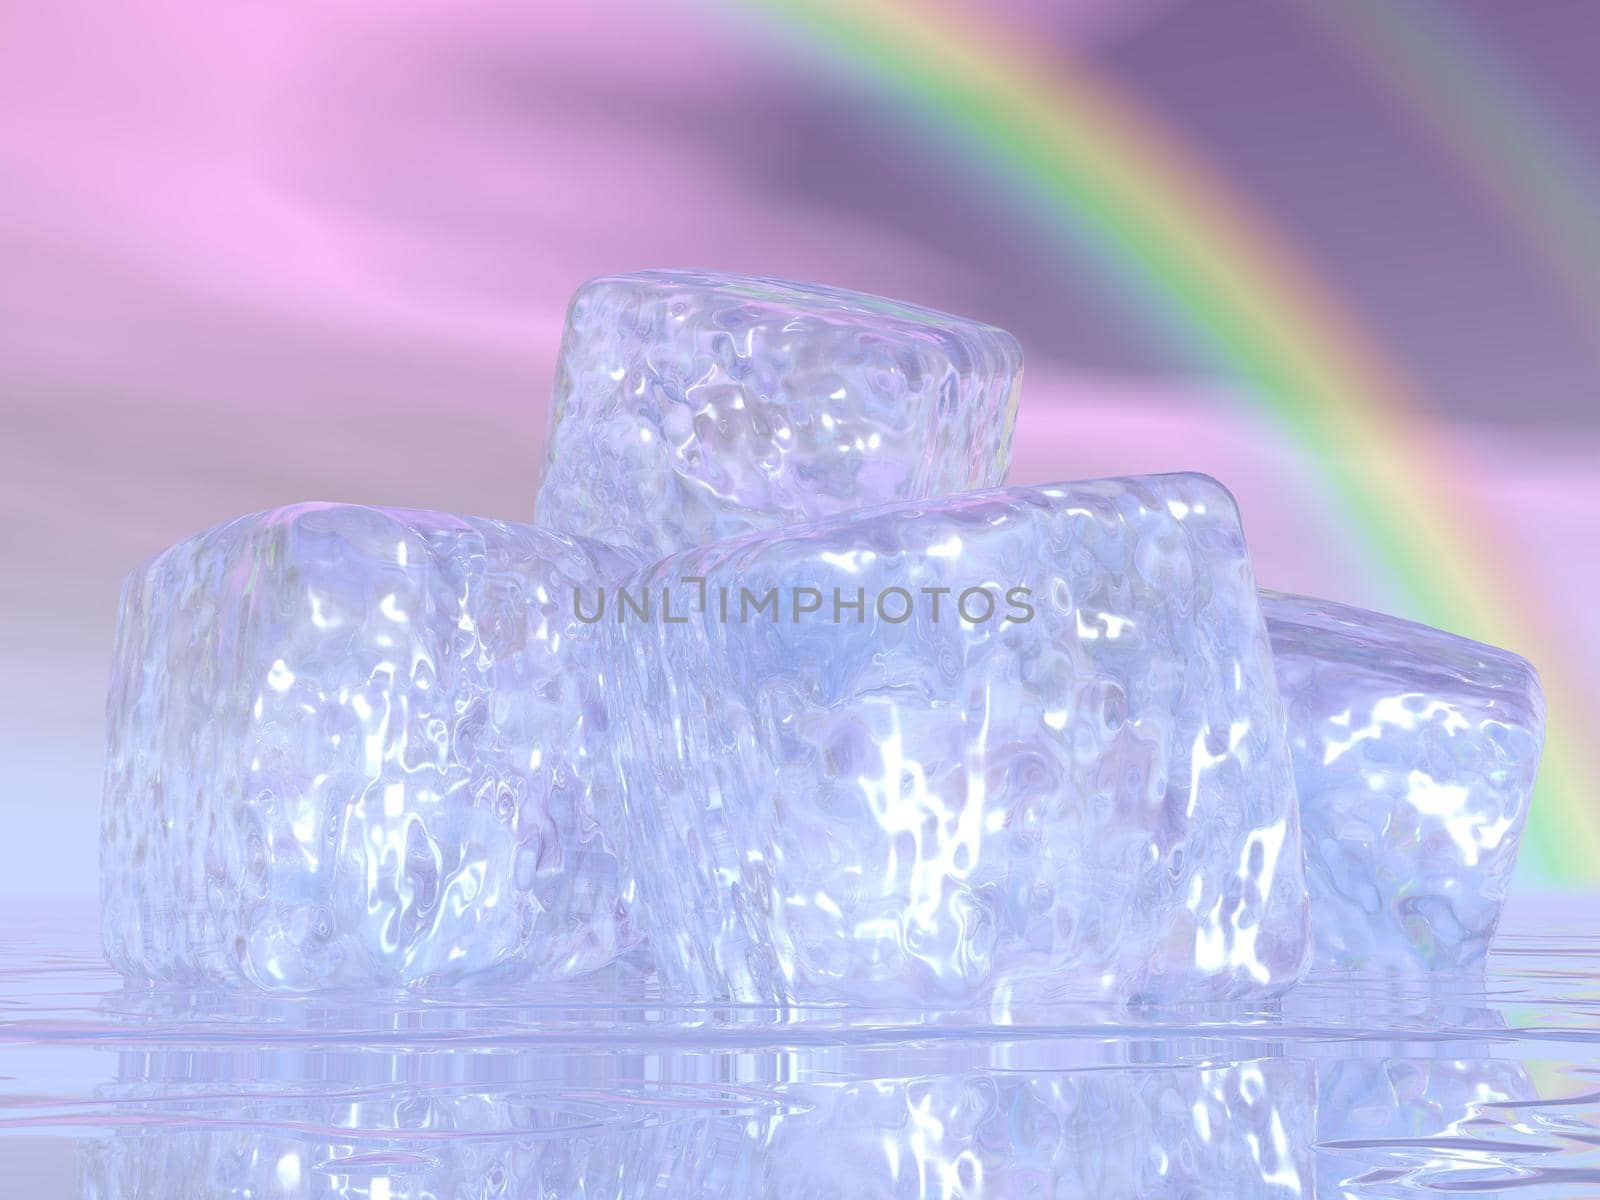 Ice cubes and rainbow - 3D render by Elenaphotos21